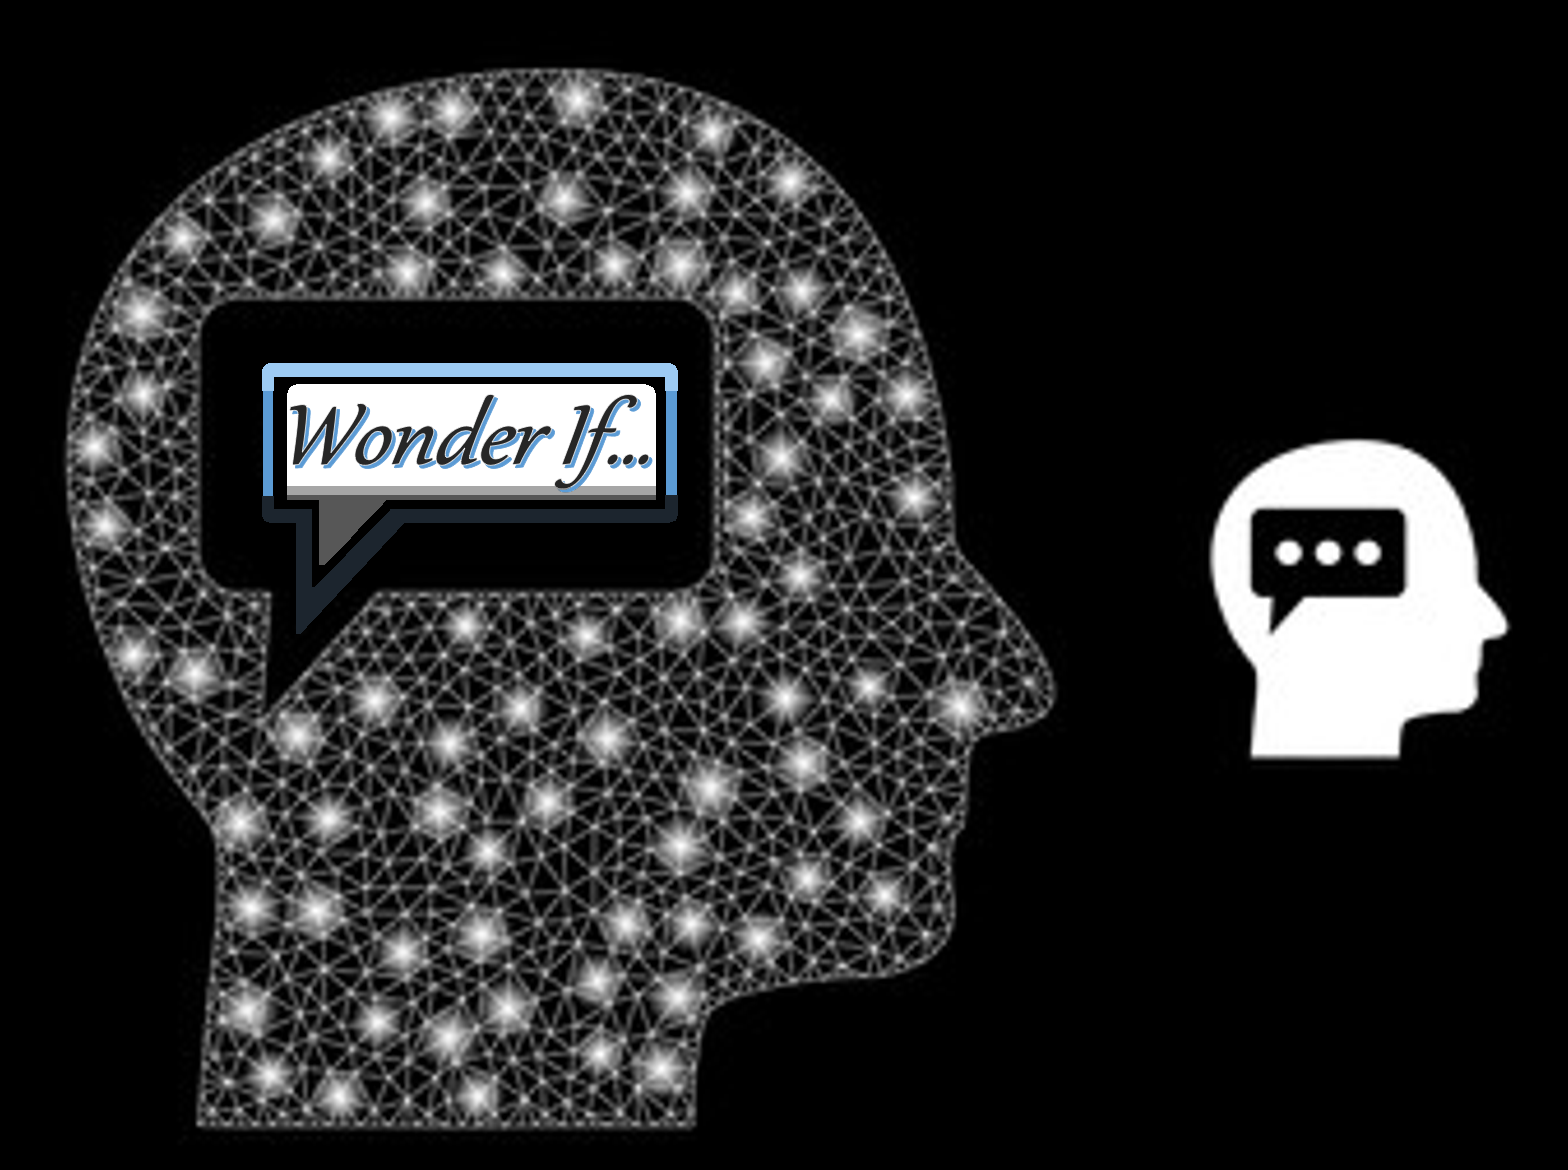 Guide to Wonderments Blog